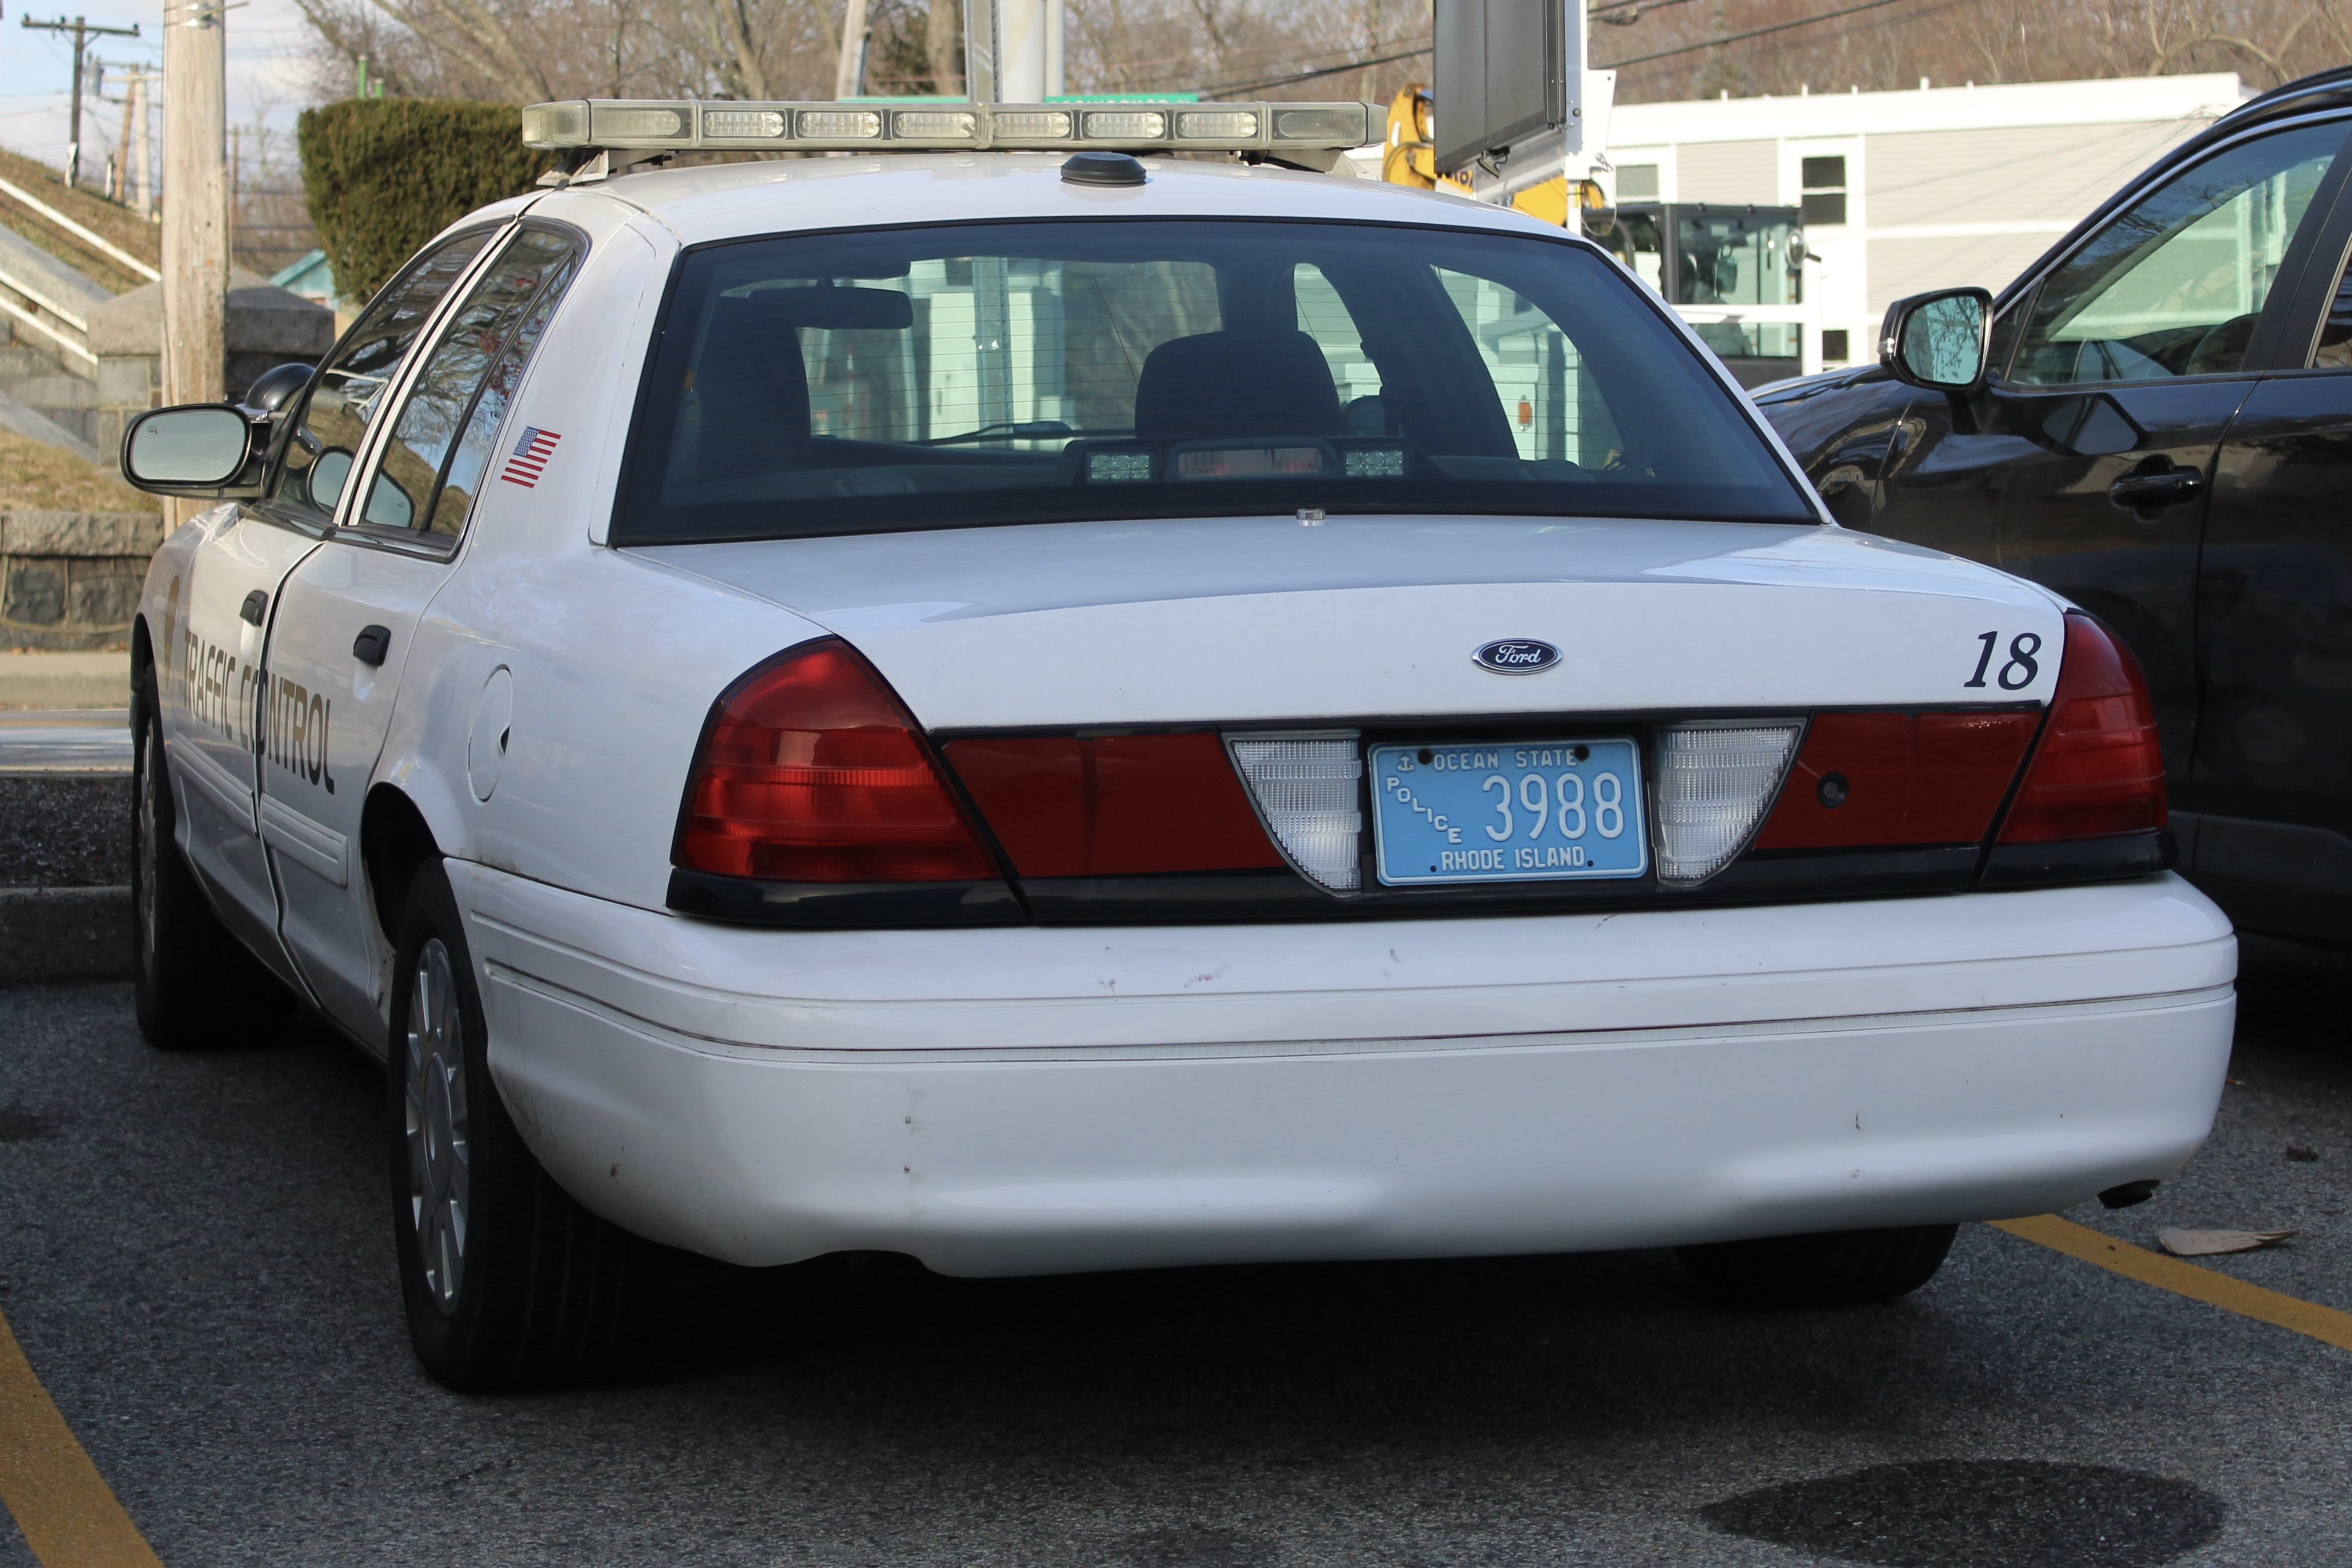 A photo  of West Warwick Police
            Car 18, a 2011 Ford Crown Victoria Police Interceptor             taken by @riemergencyvehicles